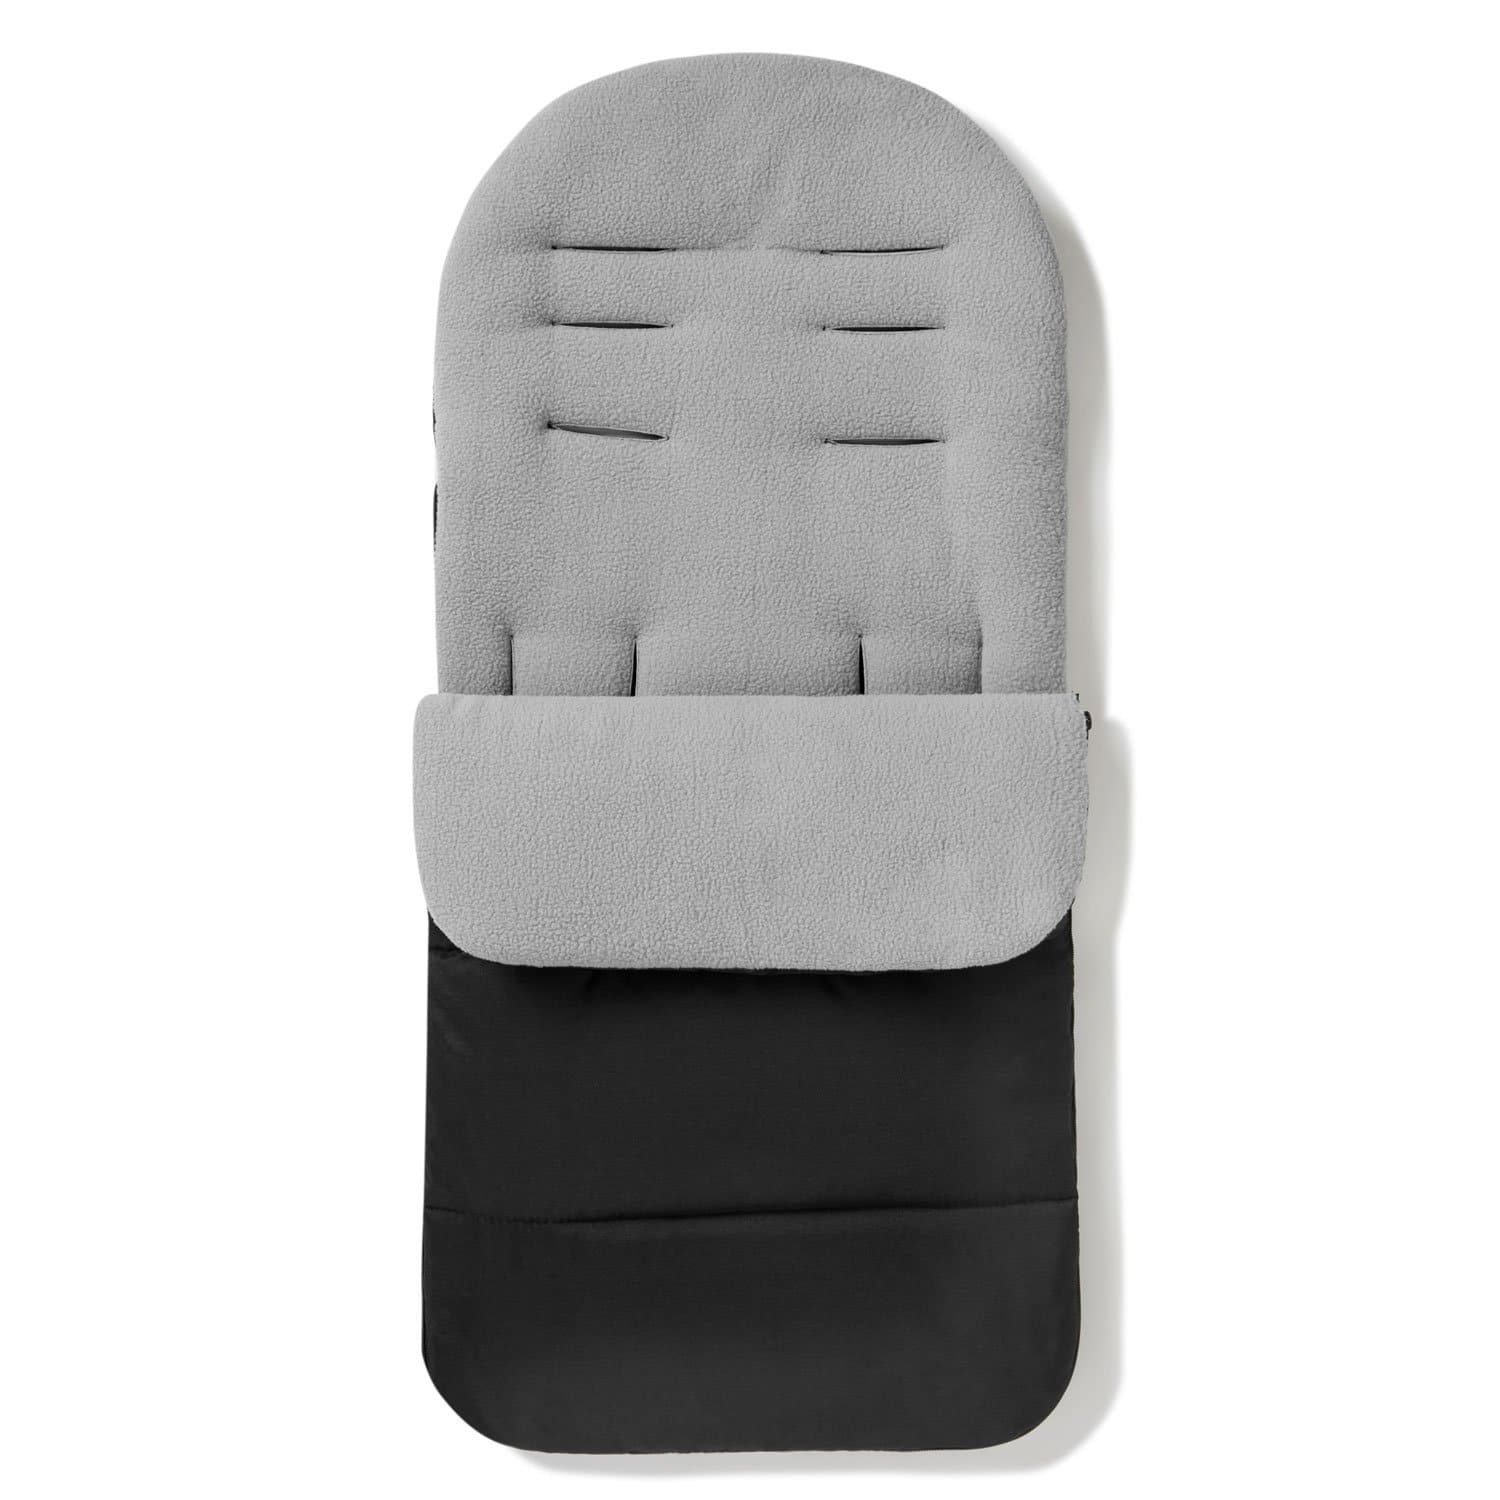 Premium Footmuff / Cosy Toes Compatible with Recaro - For Your Little One